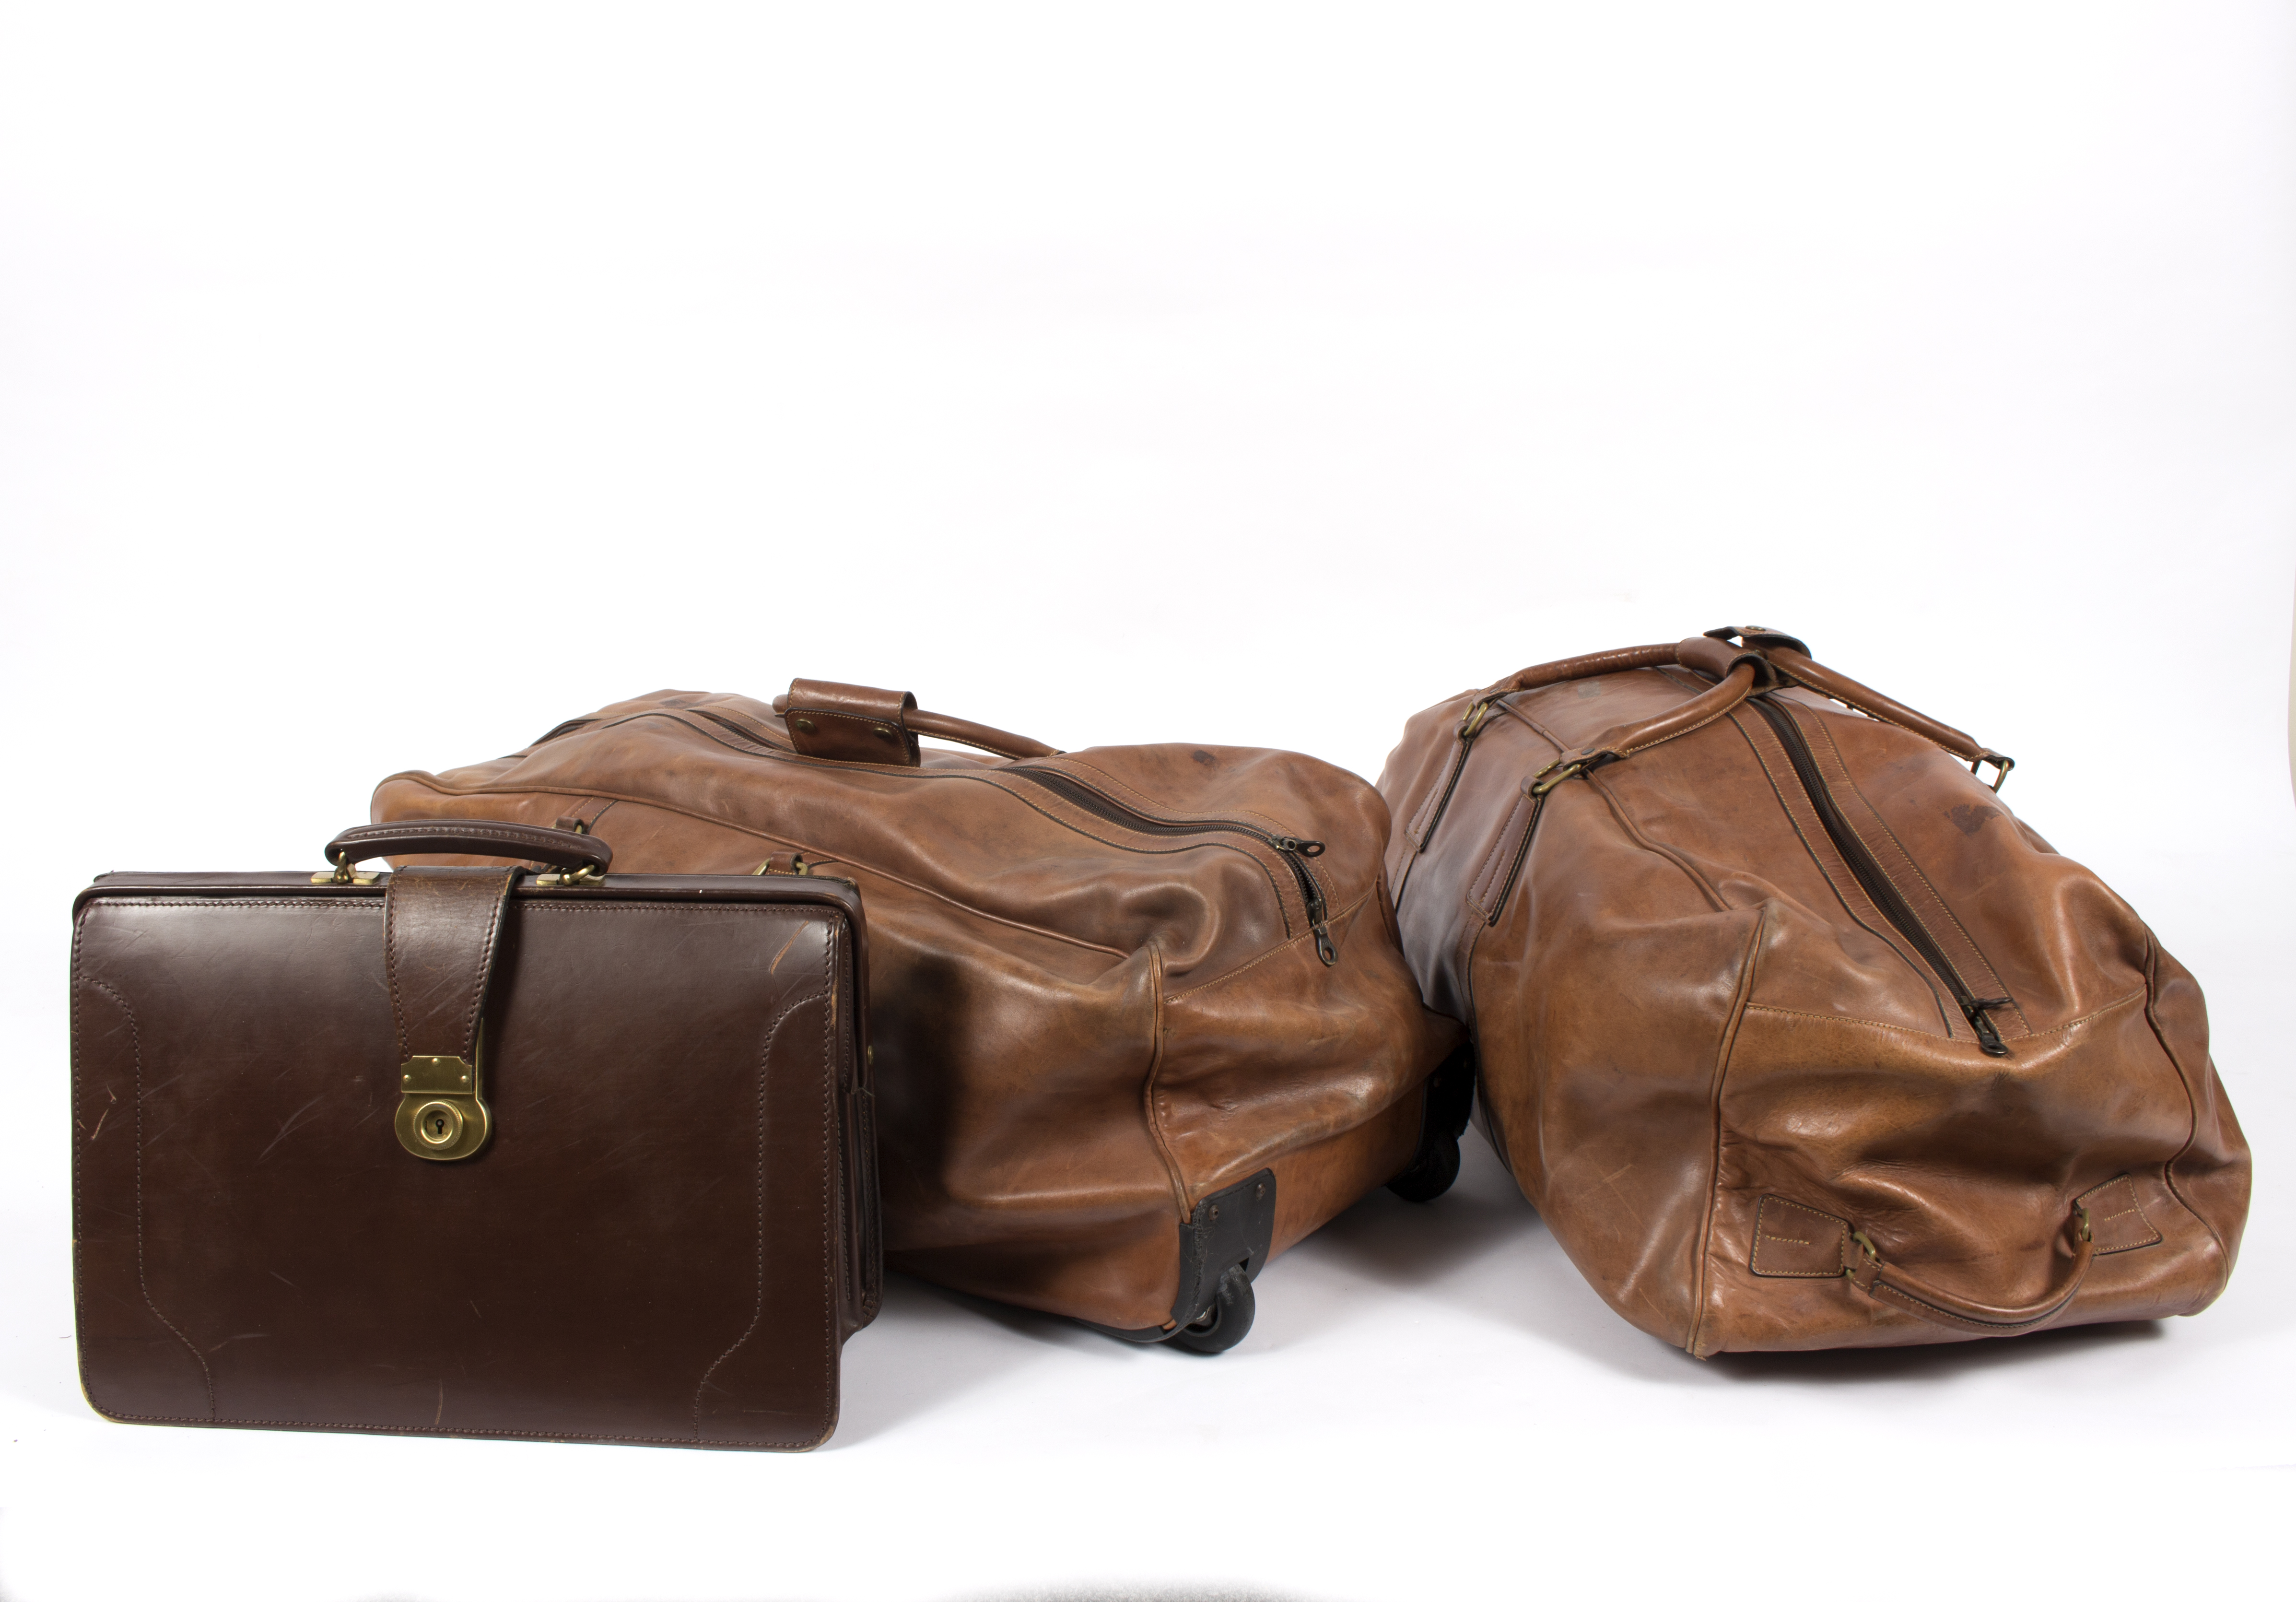 Two brown leather travel bags, by Pickett, London, both with wheels, - Image 2 of 3